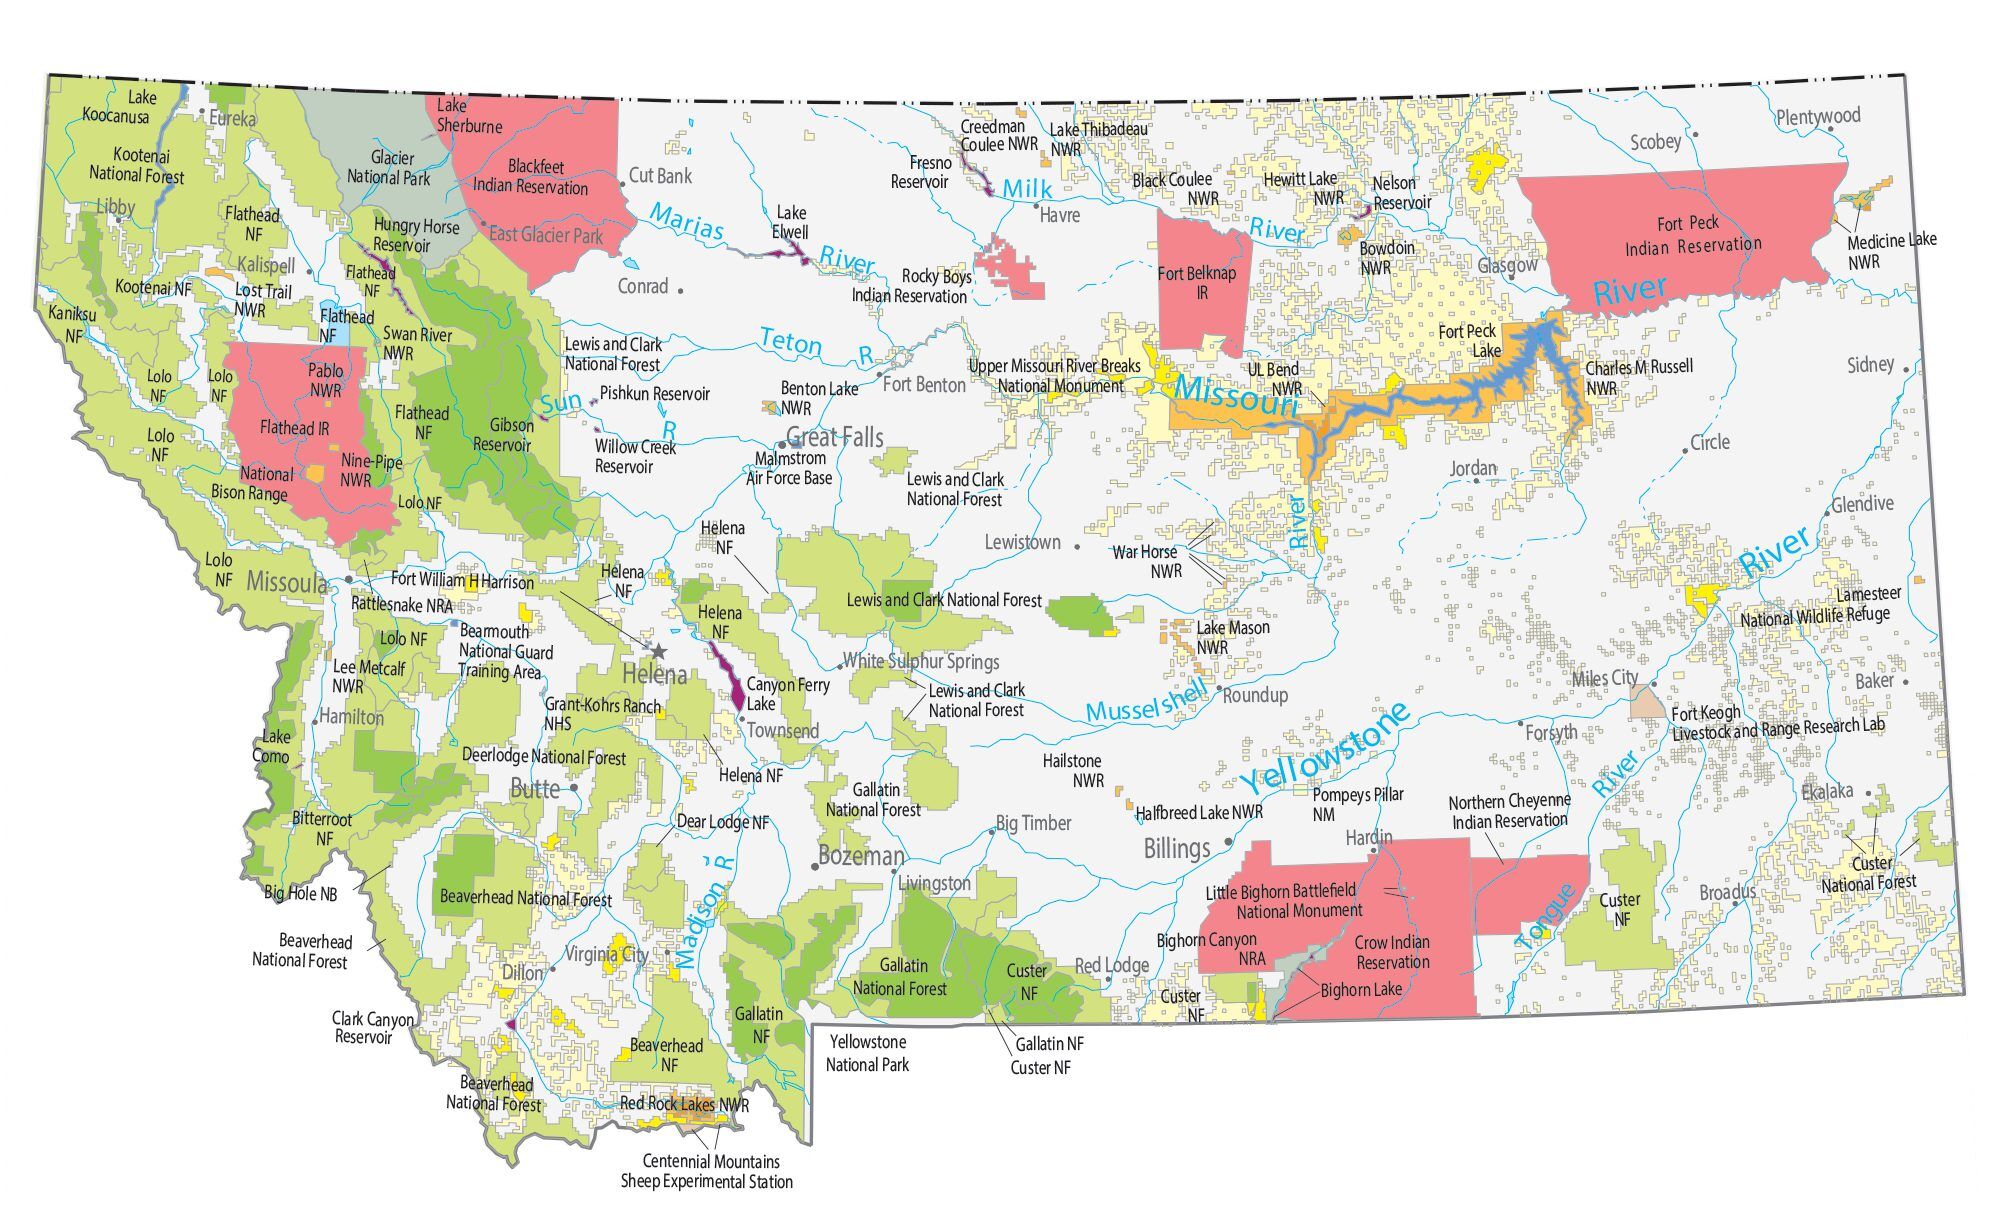 Montana State Map - Places and Landmarks - GIS Geography